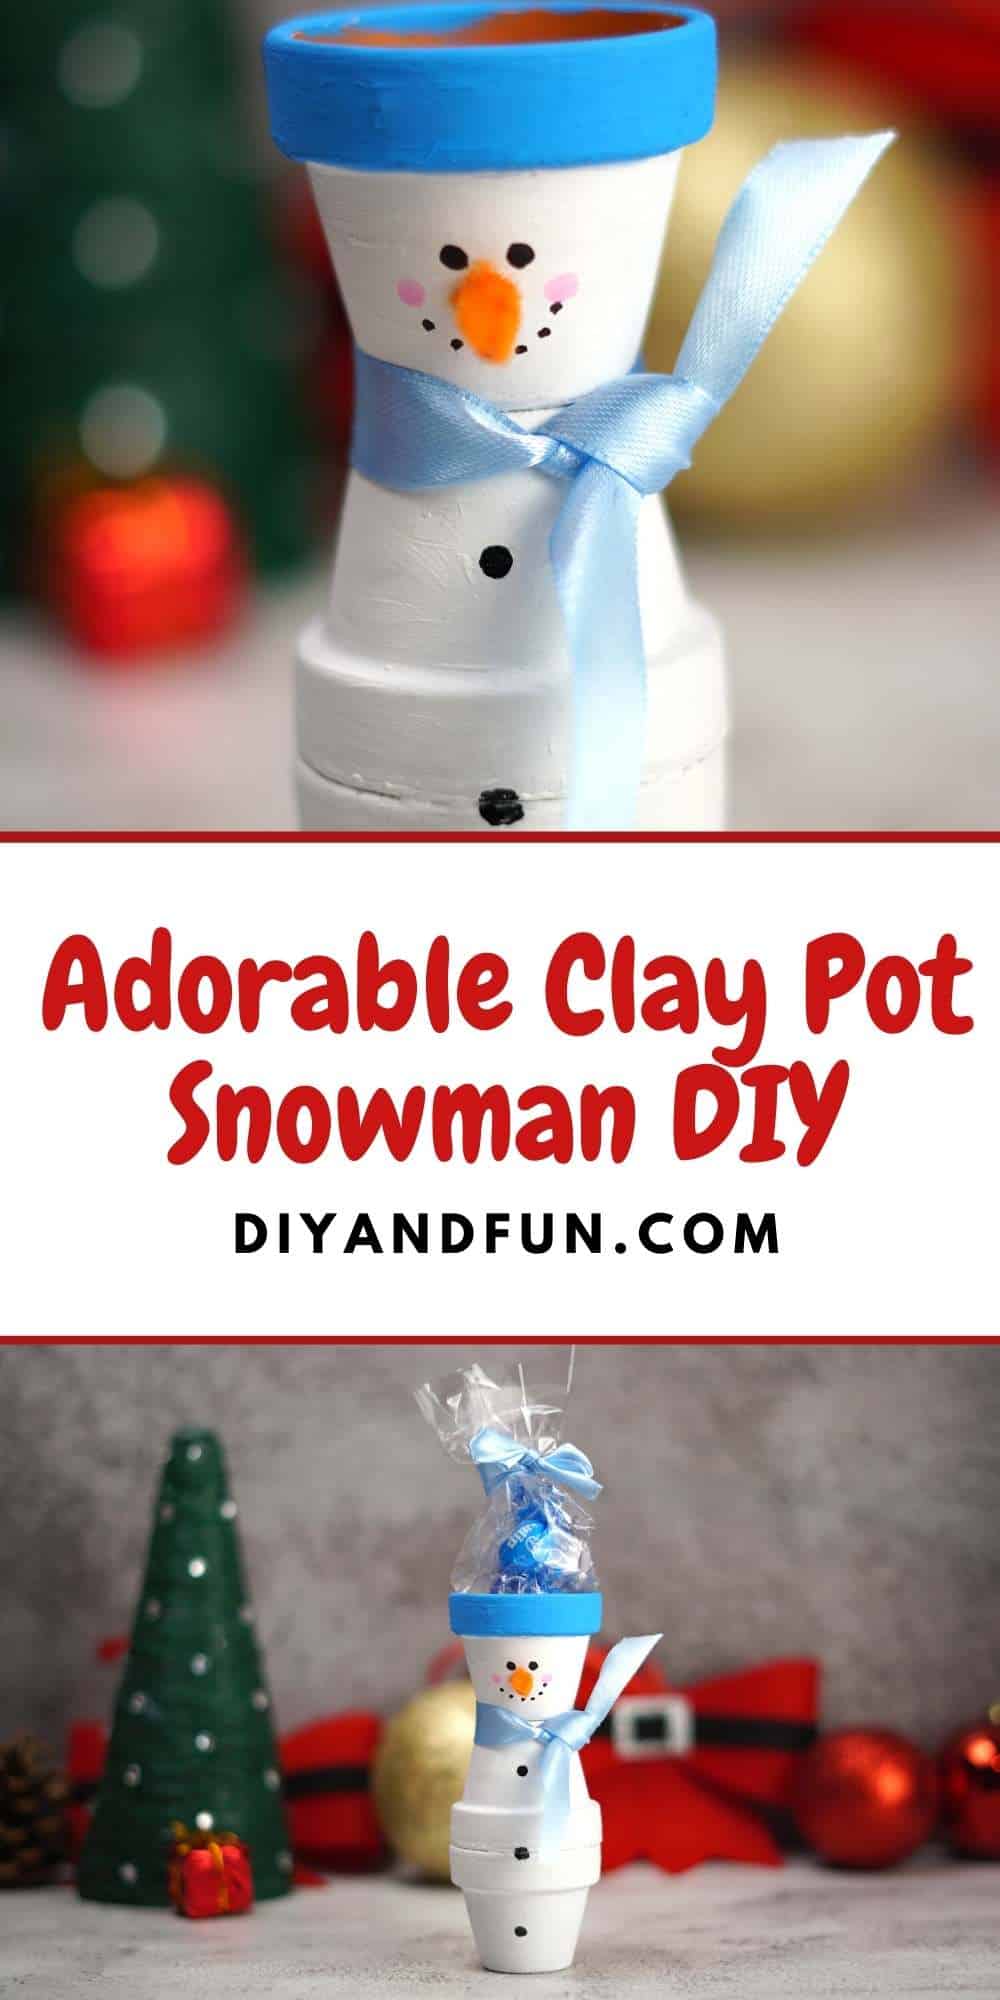 Adorable Clay Pot Snowman DIY, an easy homemade Christmas or holiday decoration made from a small terra cotta pot.